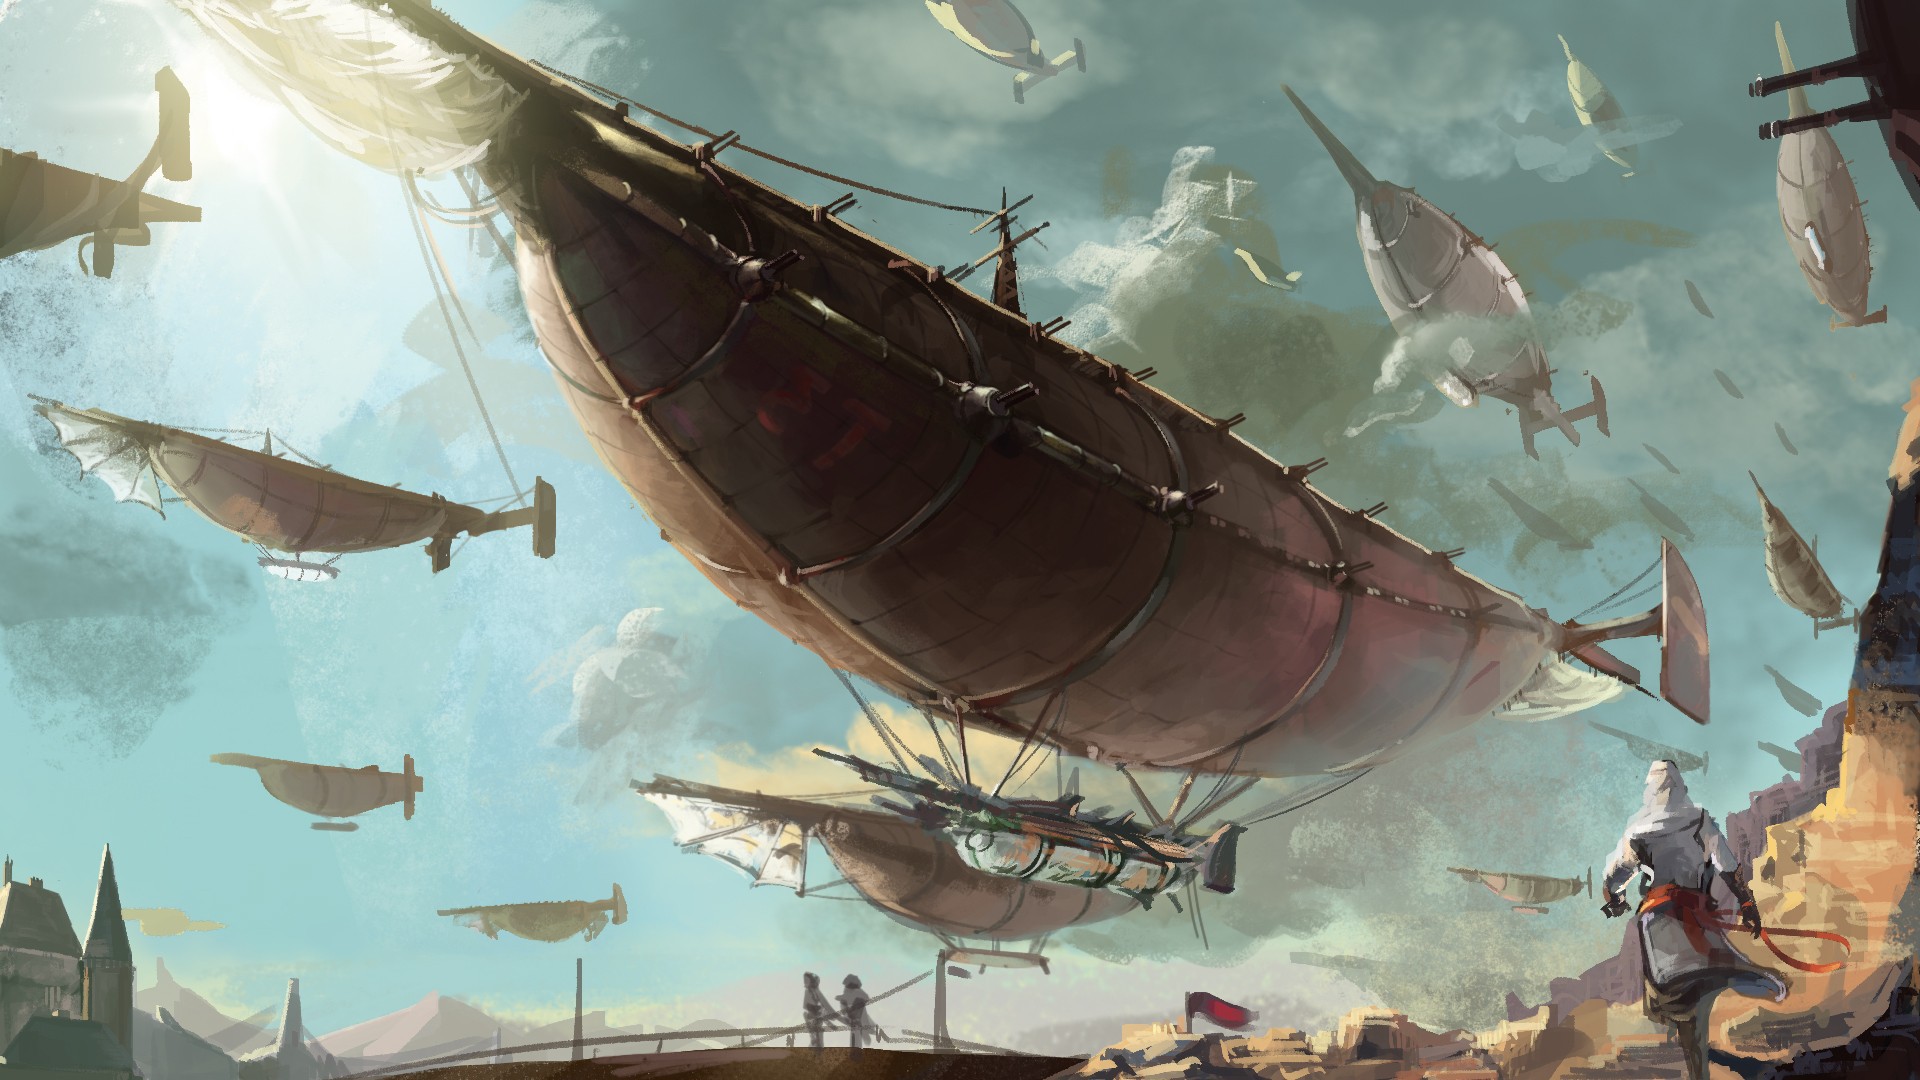 Troop steampunk airship wallpapers and images   wallpapers pictures